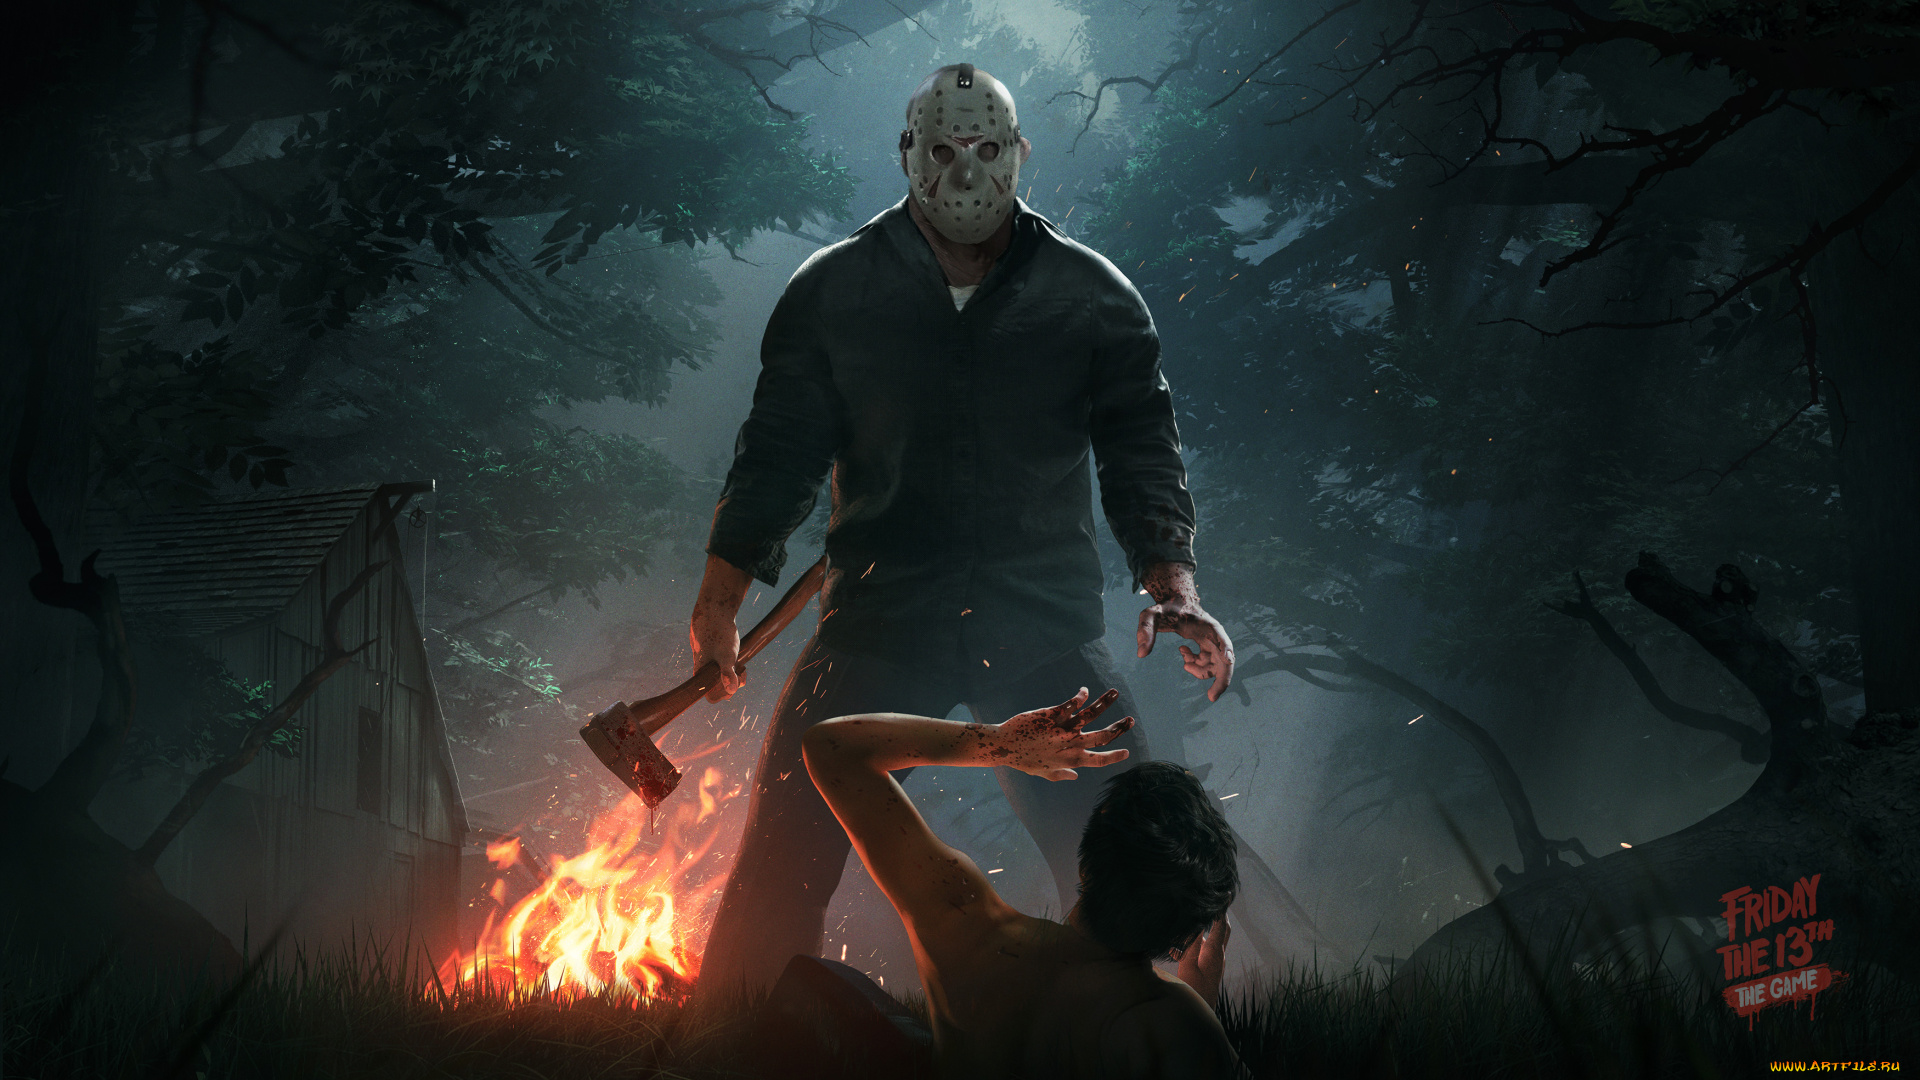 friday, the, 13th, , the, game, видео, игры, horror, action, the, game, friday, 13th